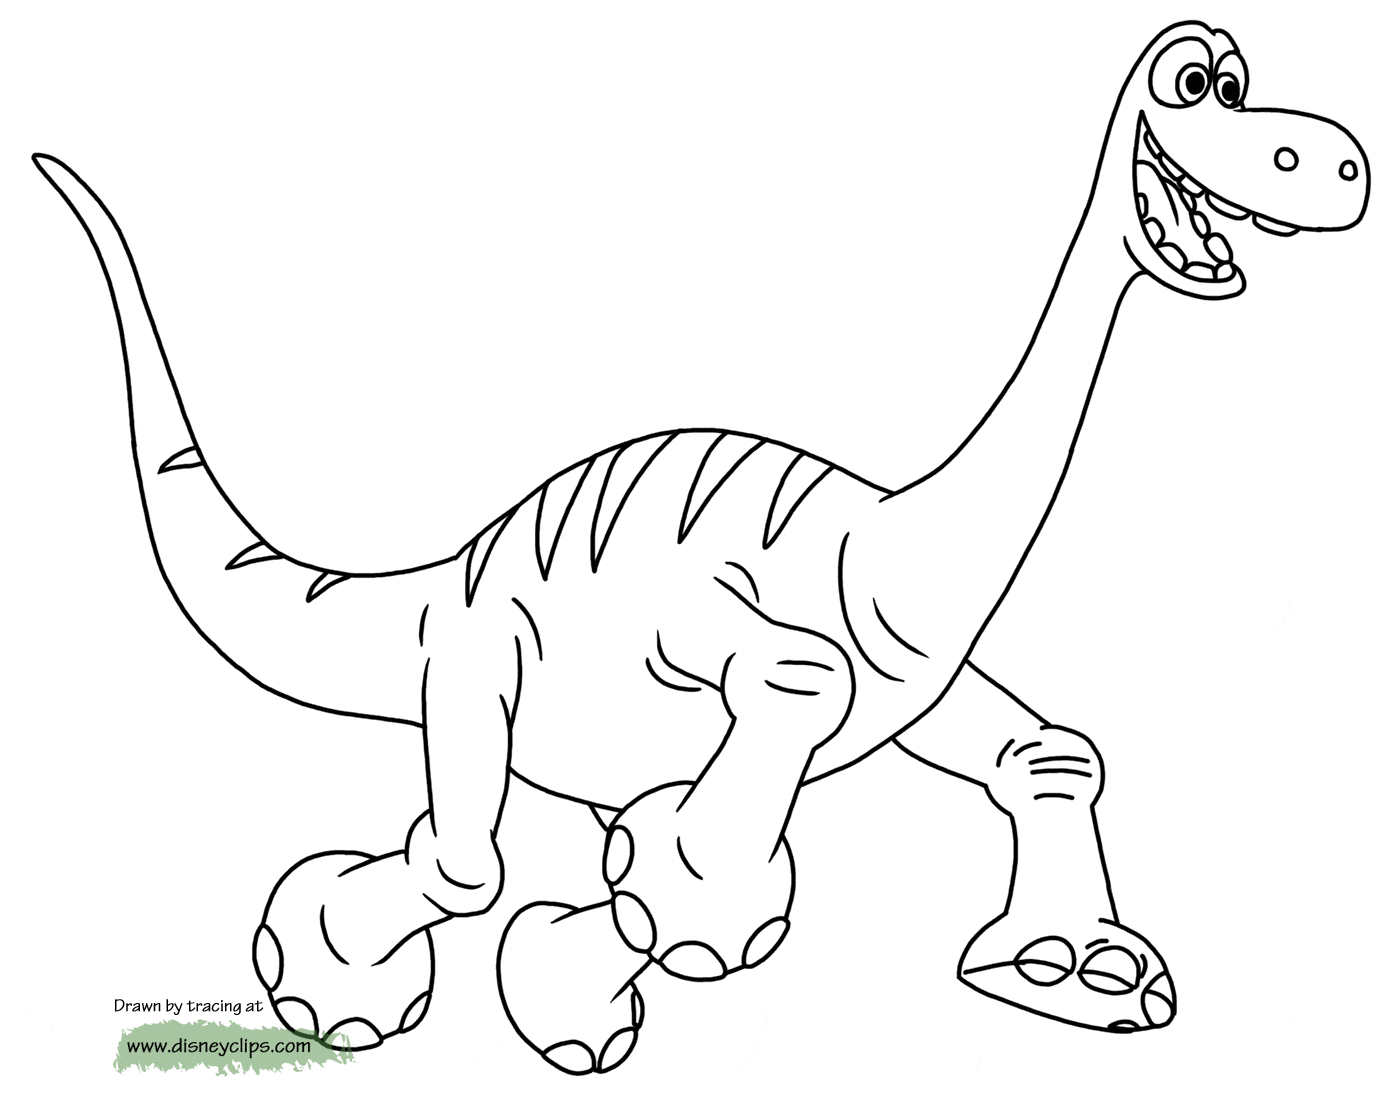 colouring pages dinosaurs printable printable dinosaur coloring pages for kids cool2bkids printable colouring dinosaurs pages 